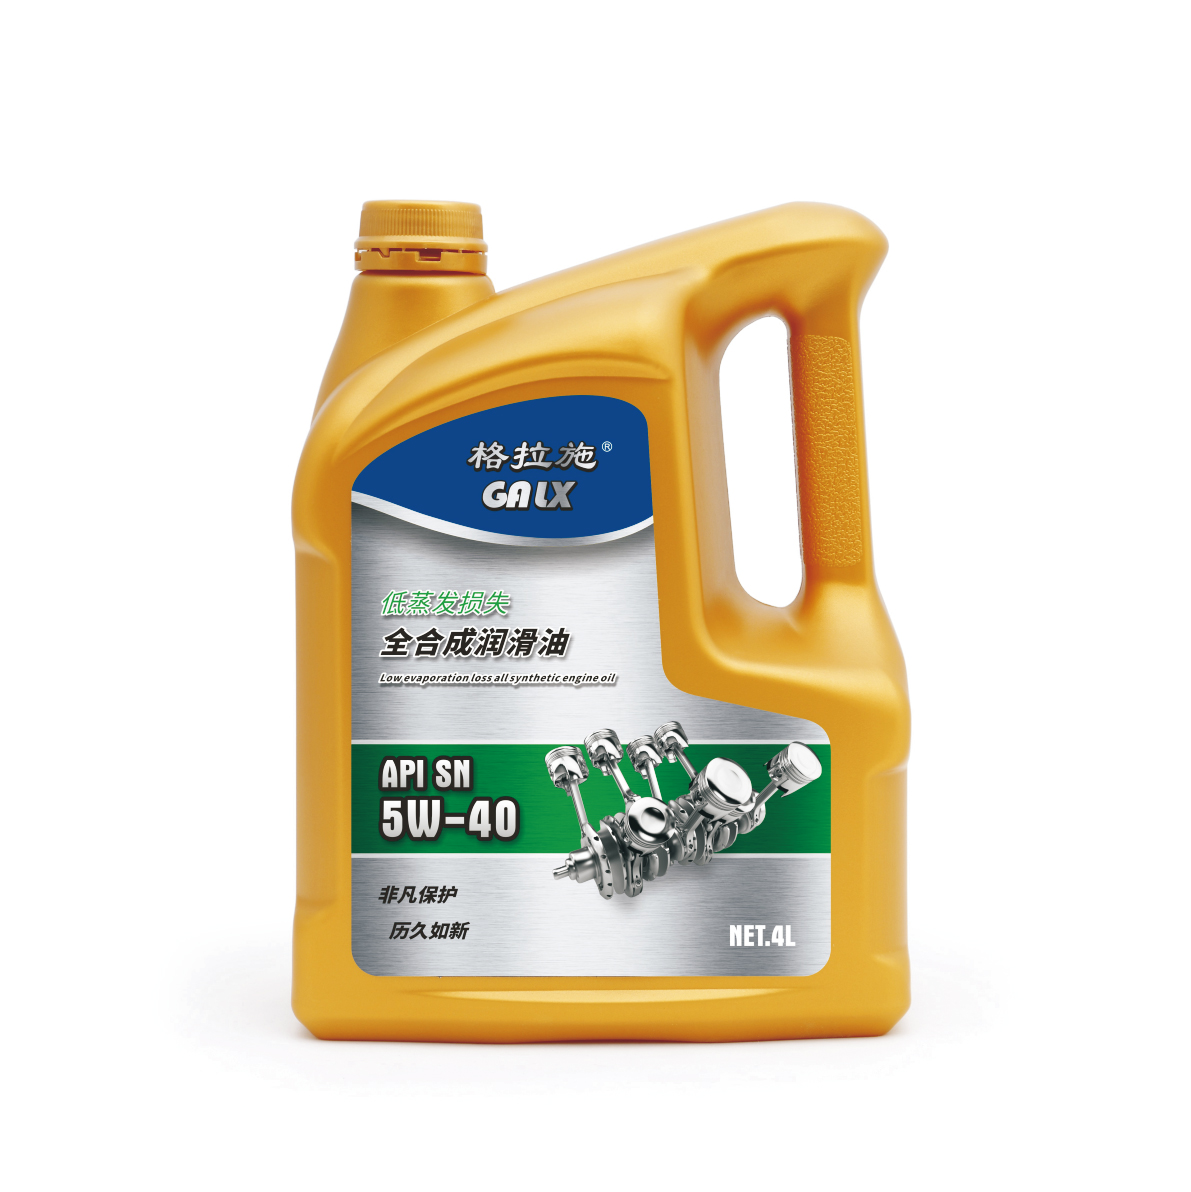 GTL low evaporation loss fully synthetic engine oils API SN SAE 5W30